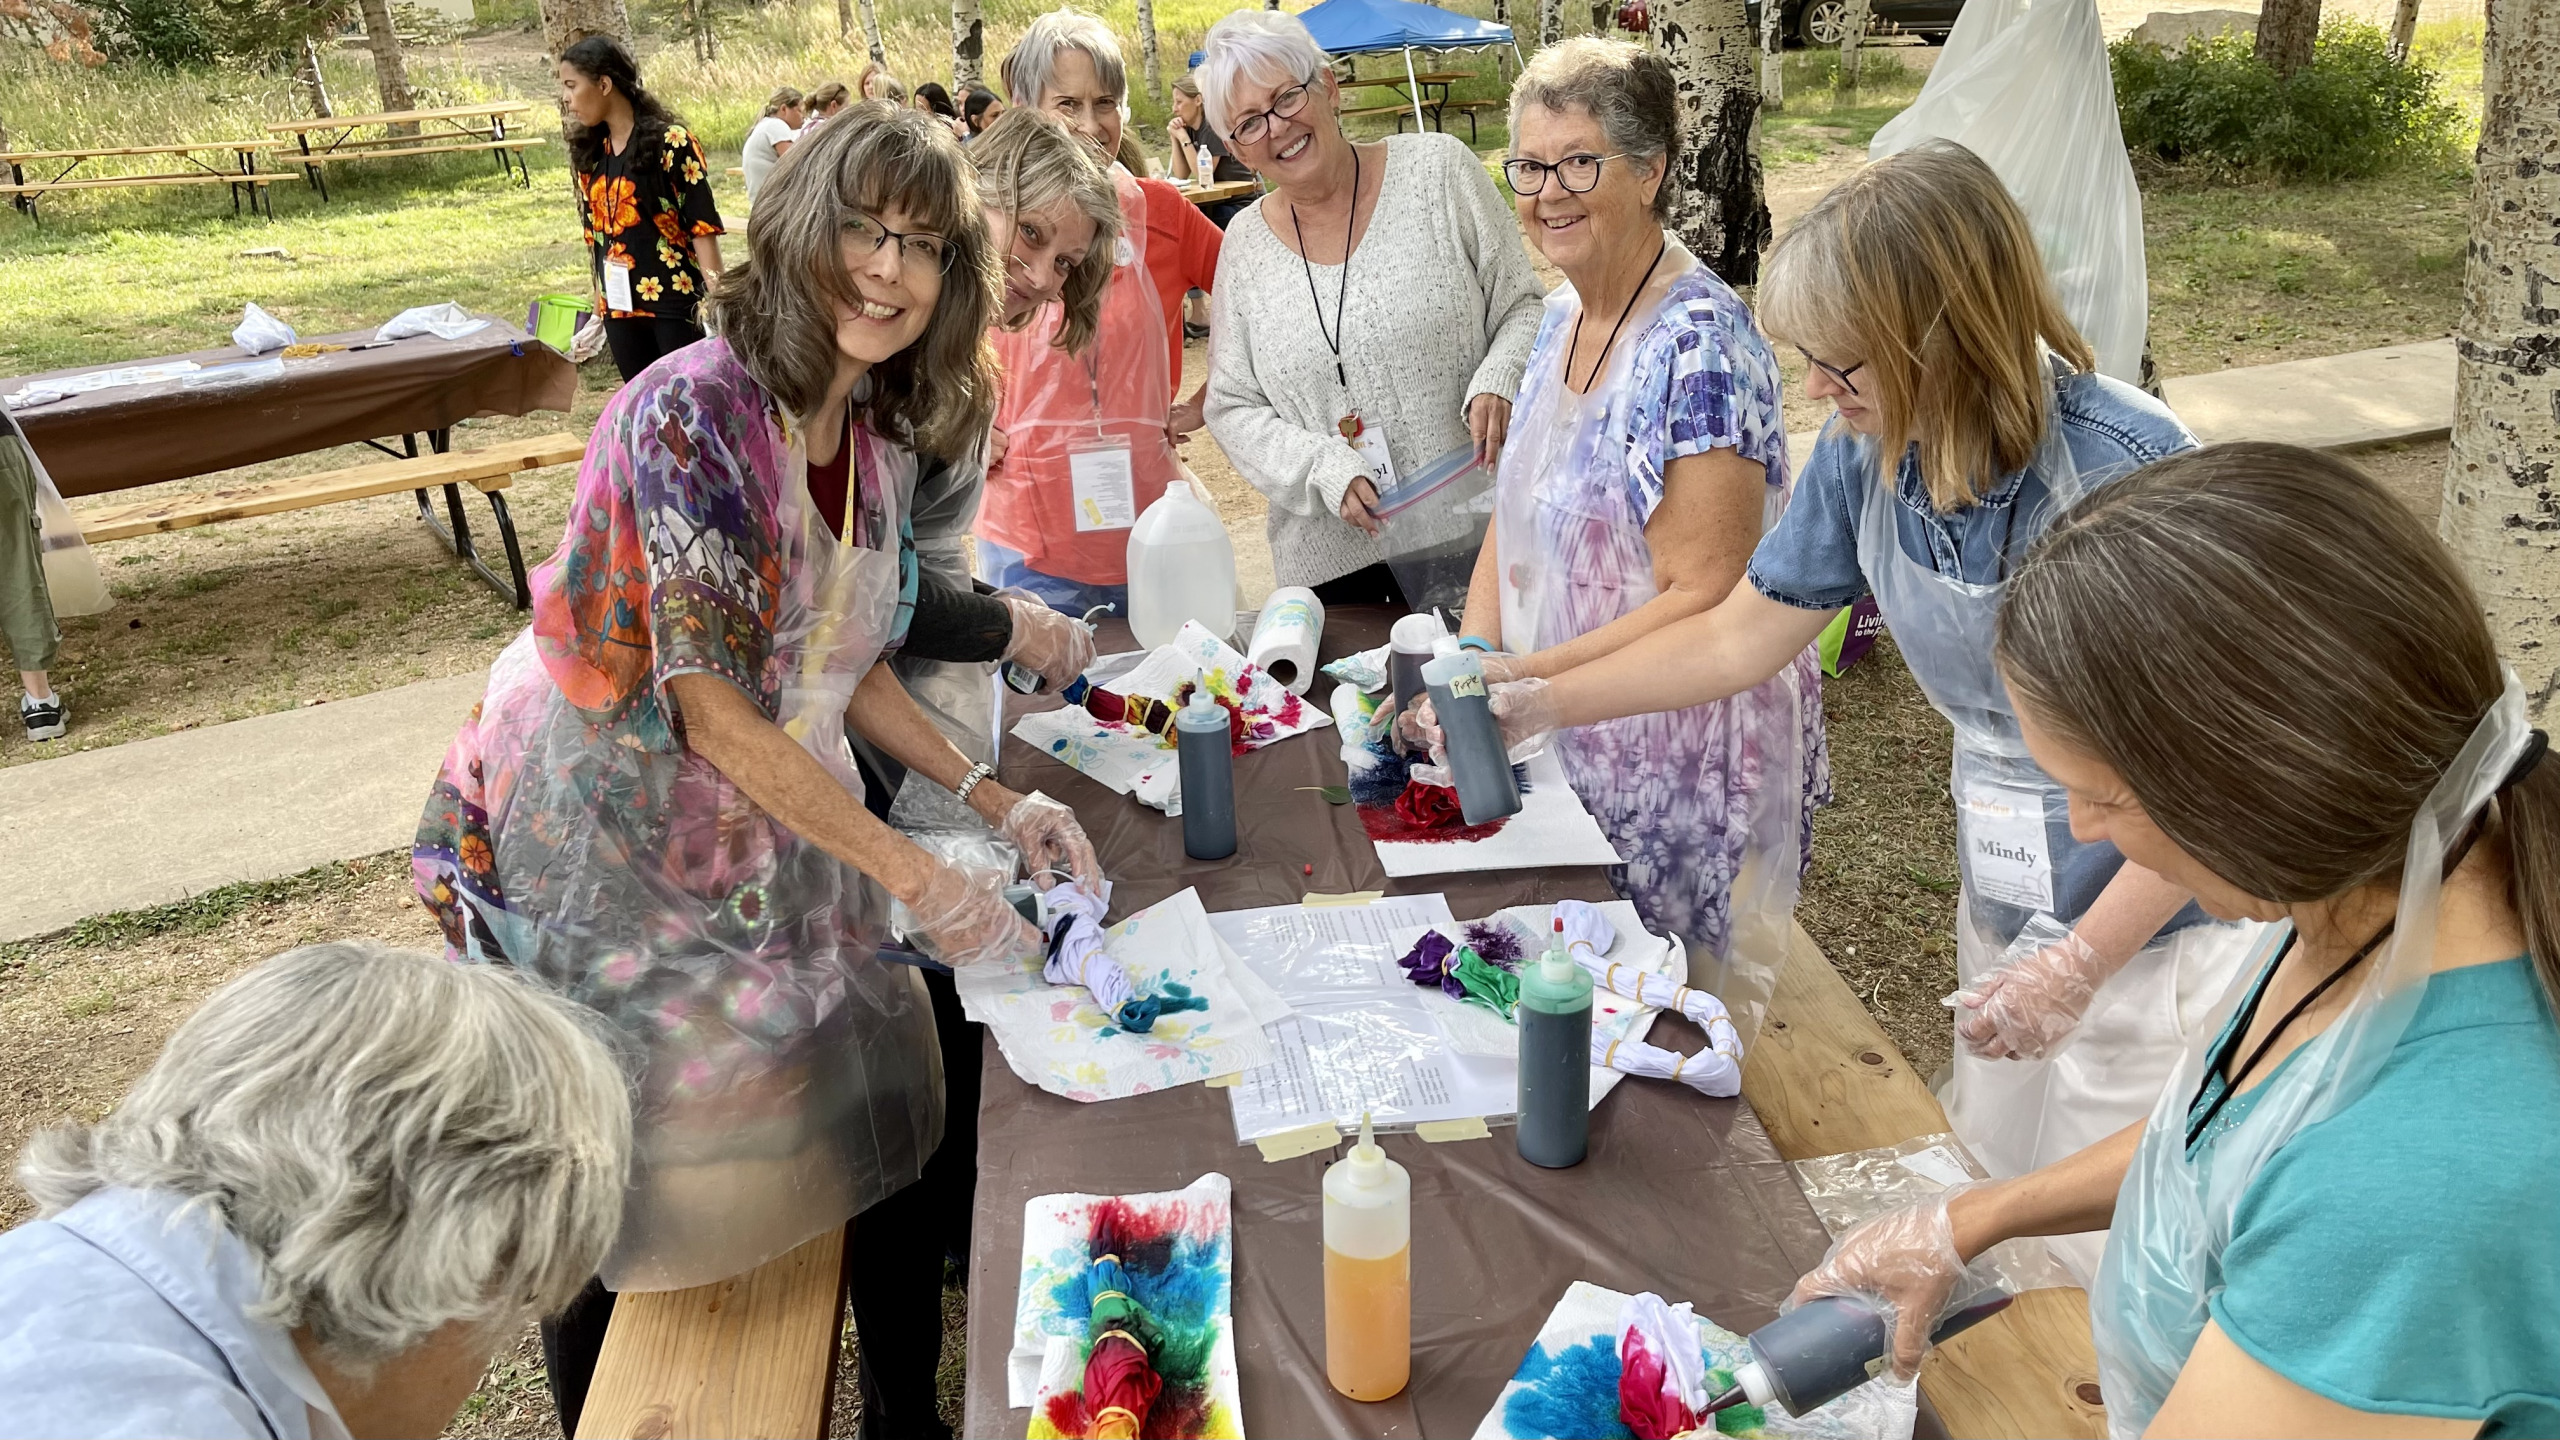 WOMEN LEARN TO BEE-LIEVE AT ANNUAL CONVENTION